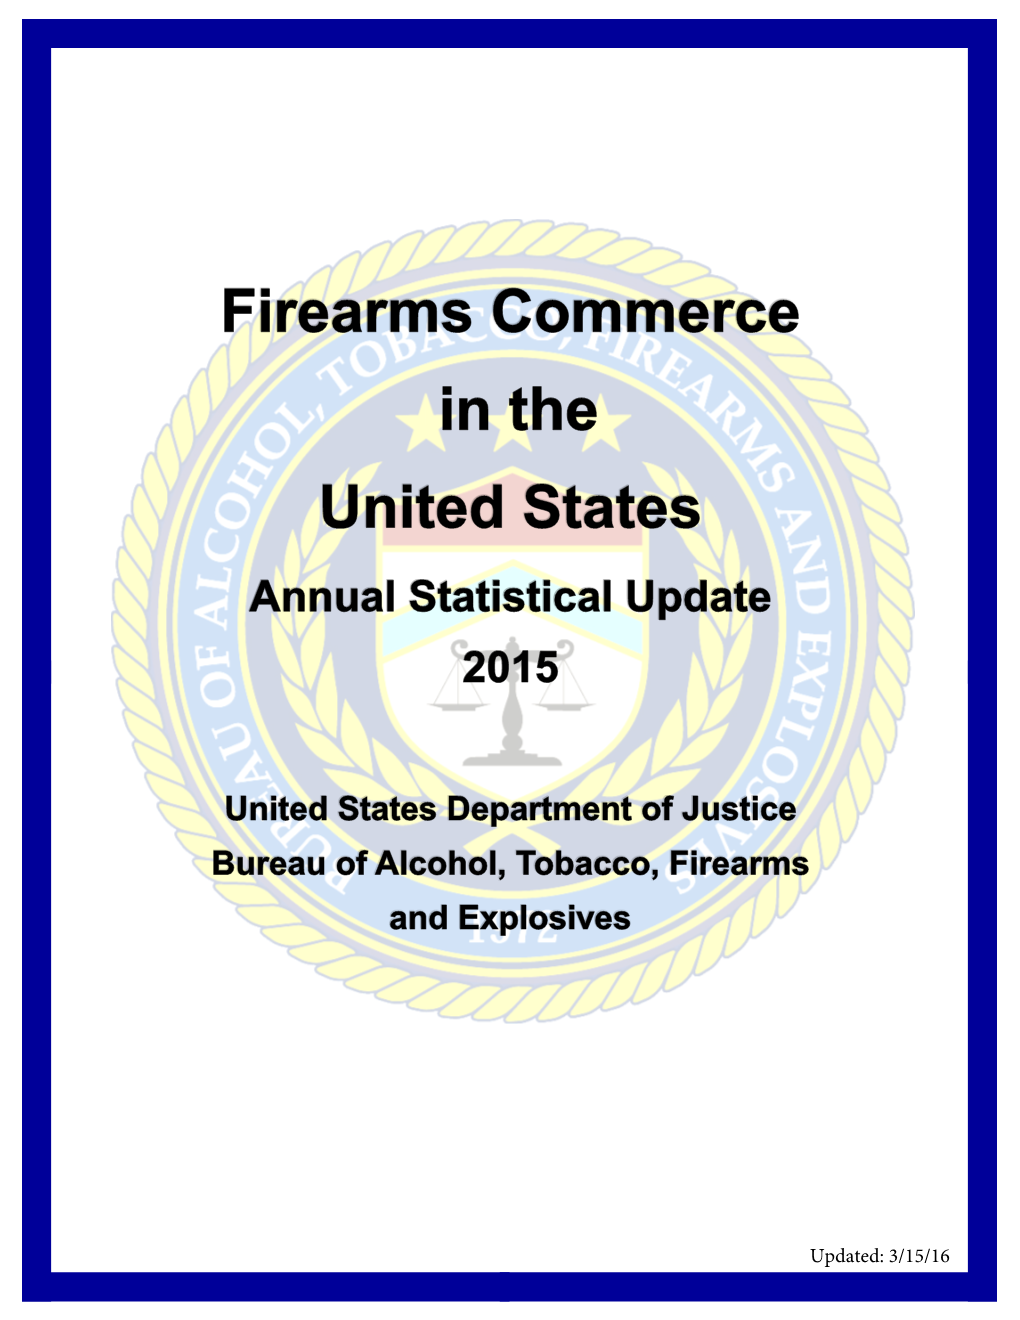 Firearms Commerce in the United States